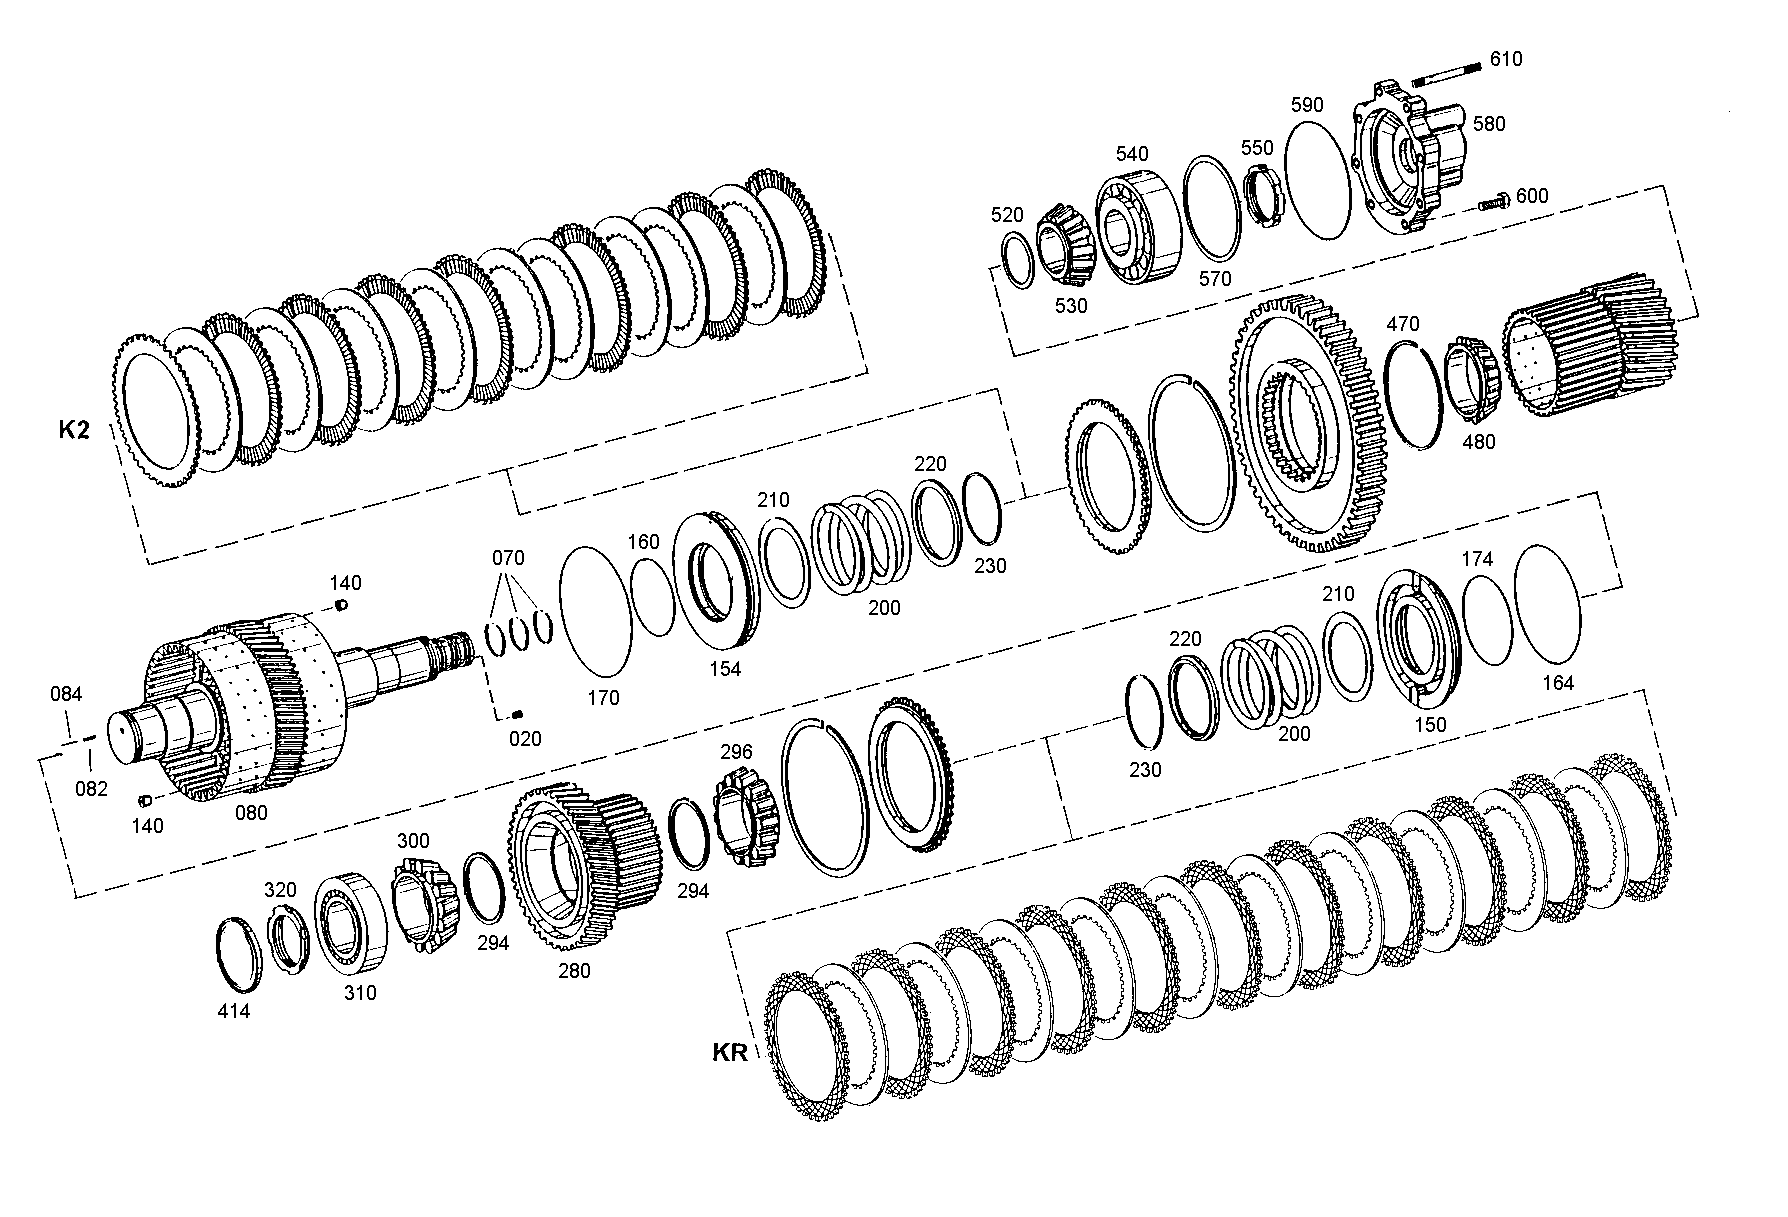 drawing for BUSINESS SOLUTIONS / DIV.GESCO 100234A1 - WASHER (figure 3)